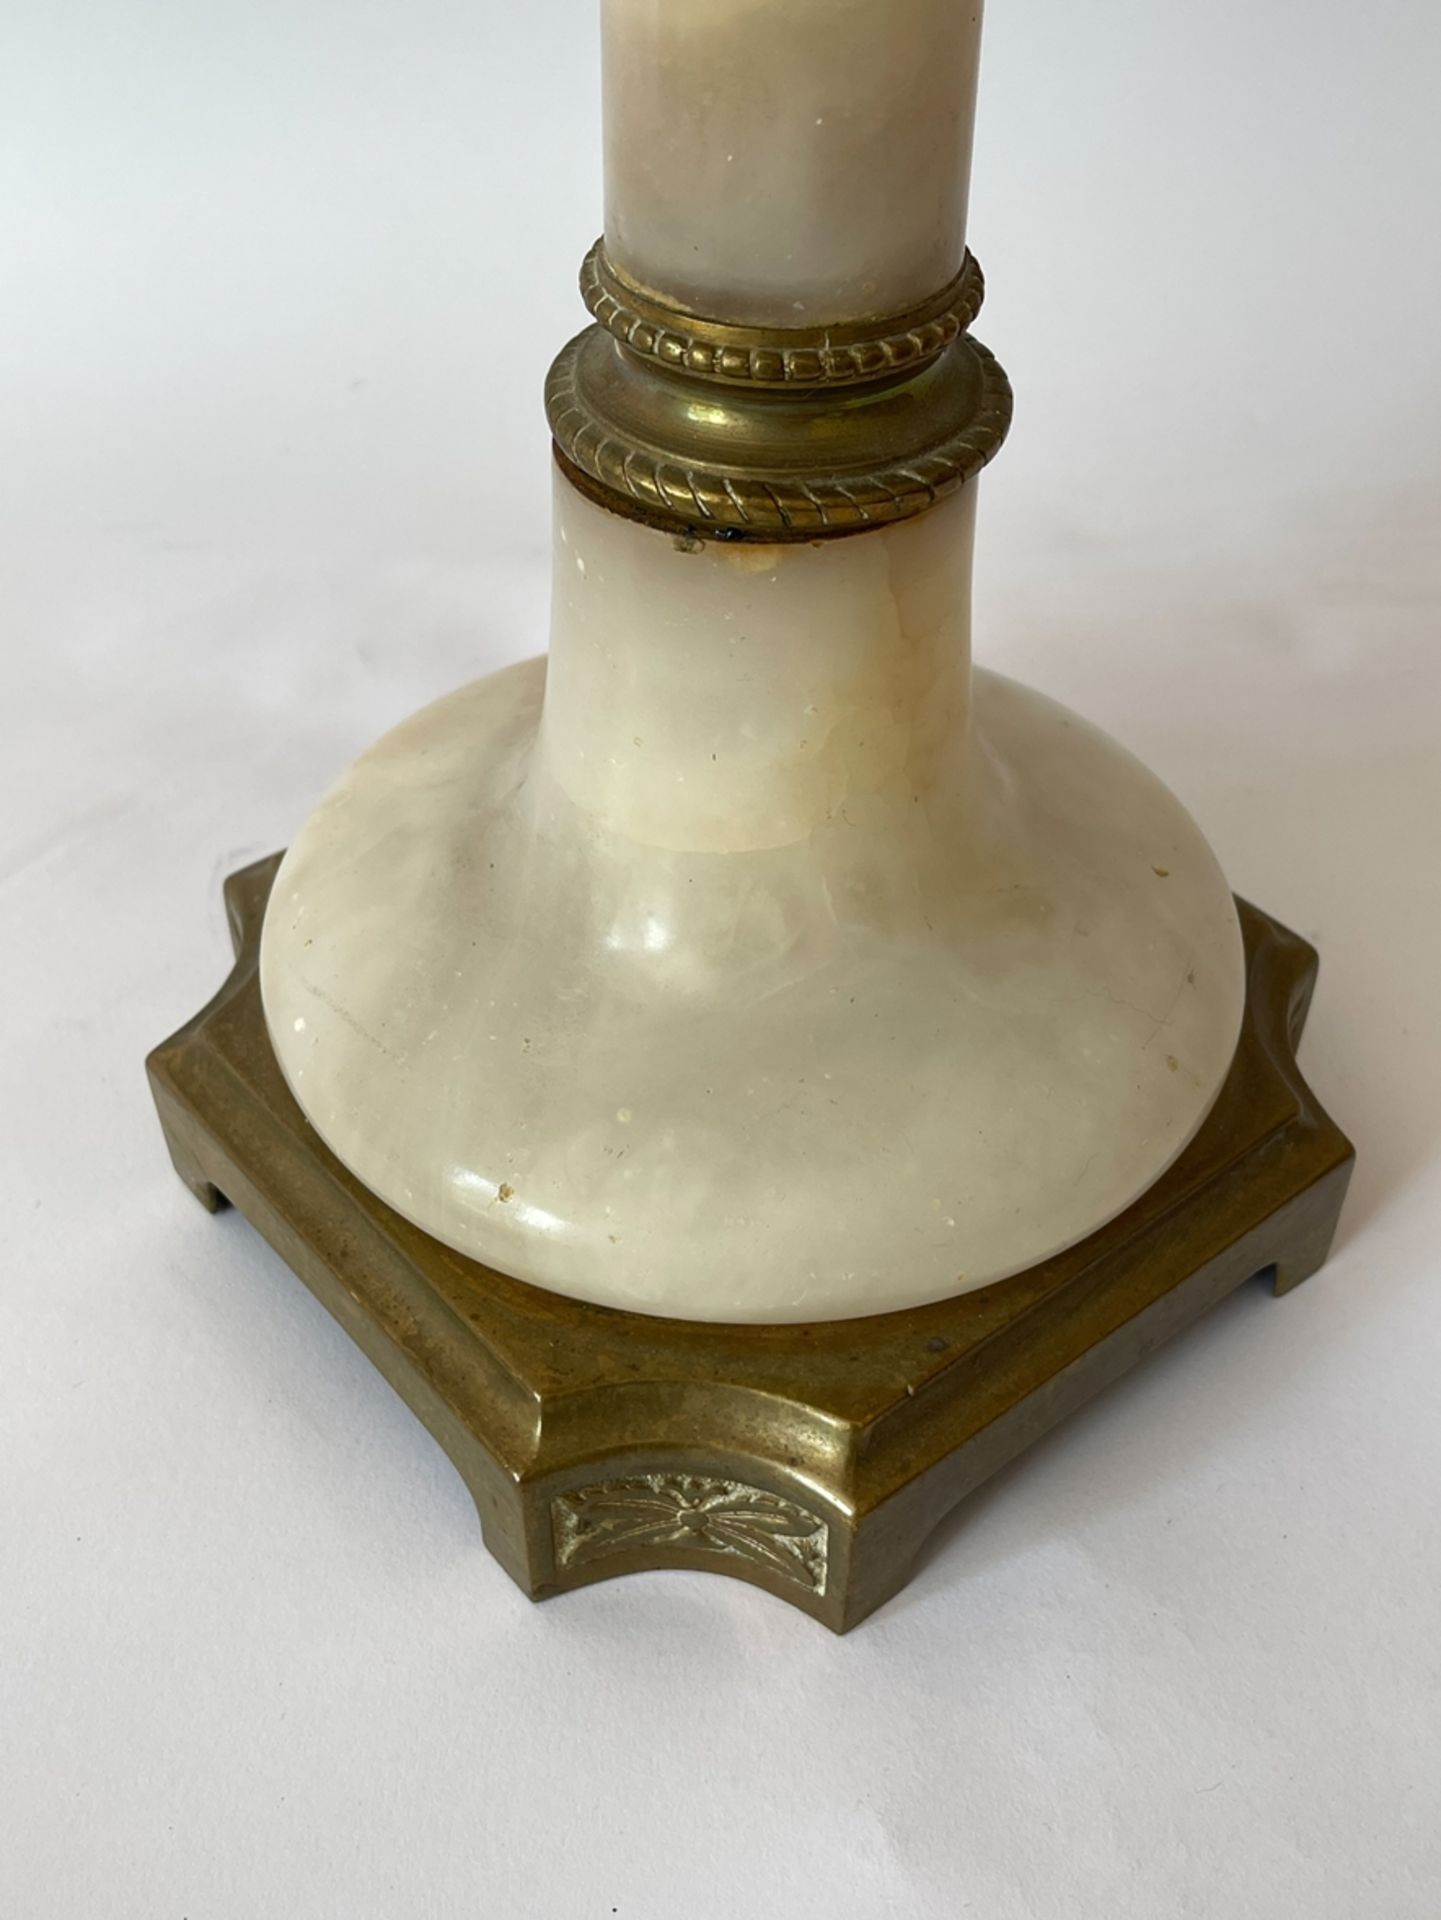 Alabaster lamp with applications made out of bronze - Image 7 of 11